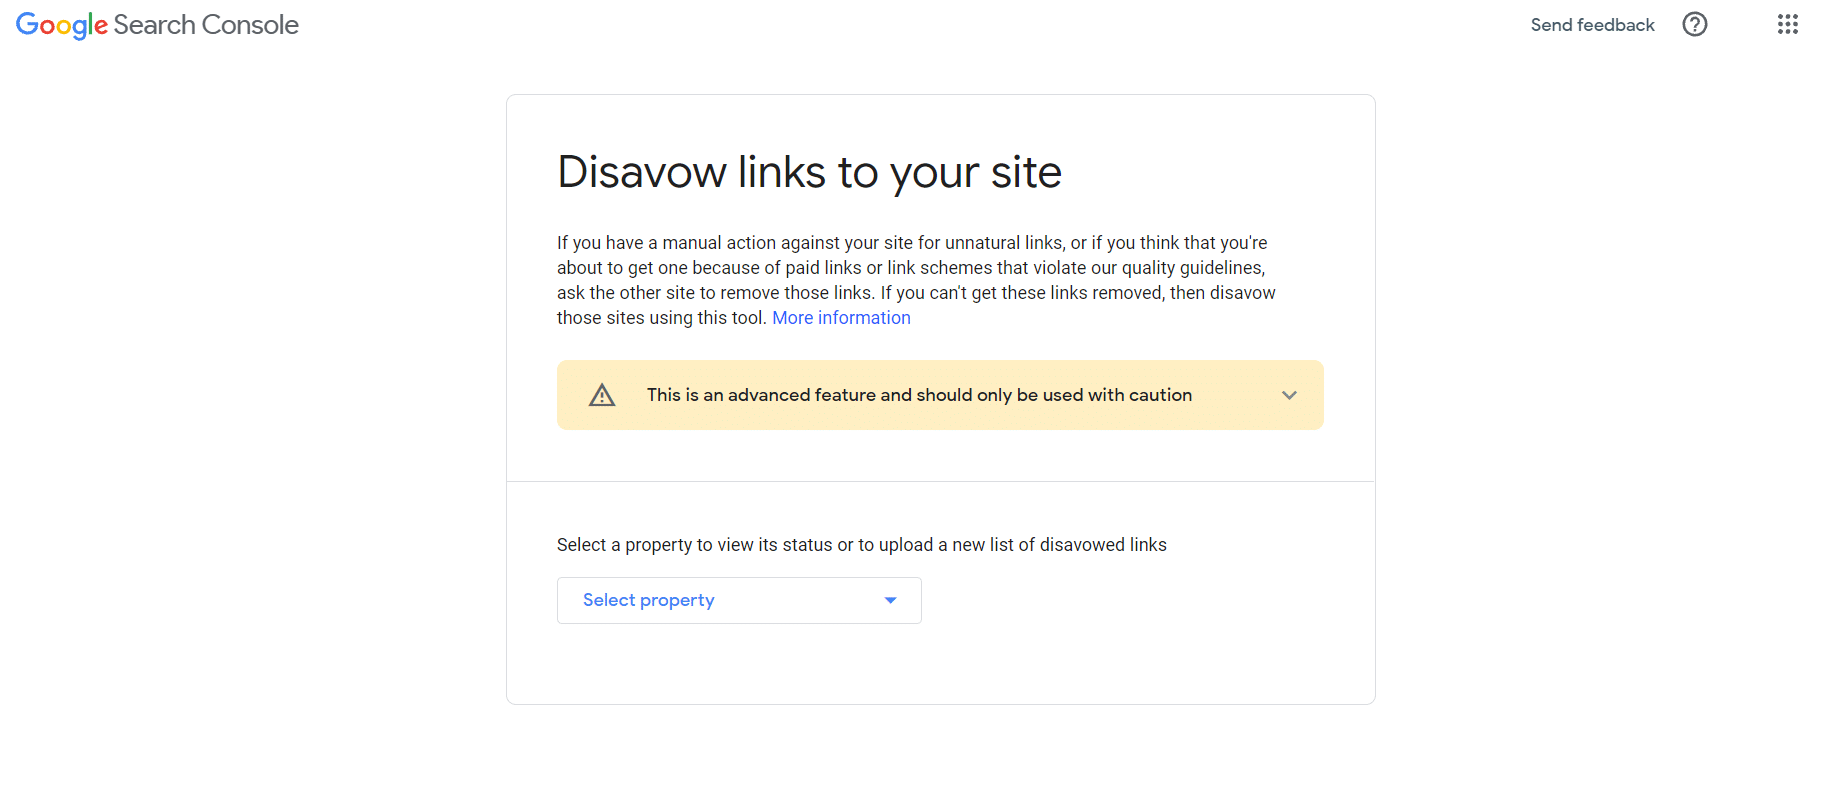 Screenshot of Google Search Console disavow tool.